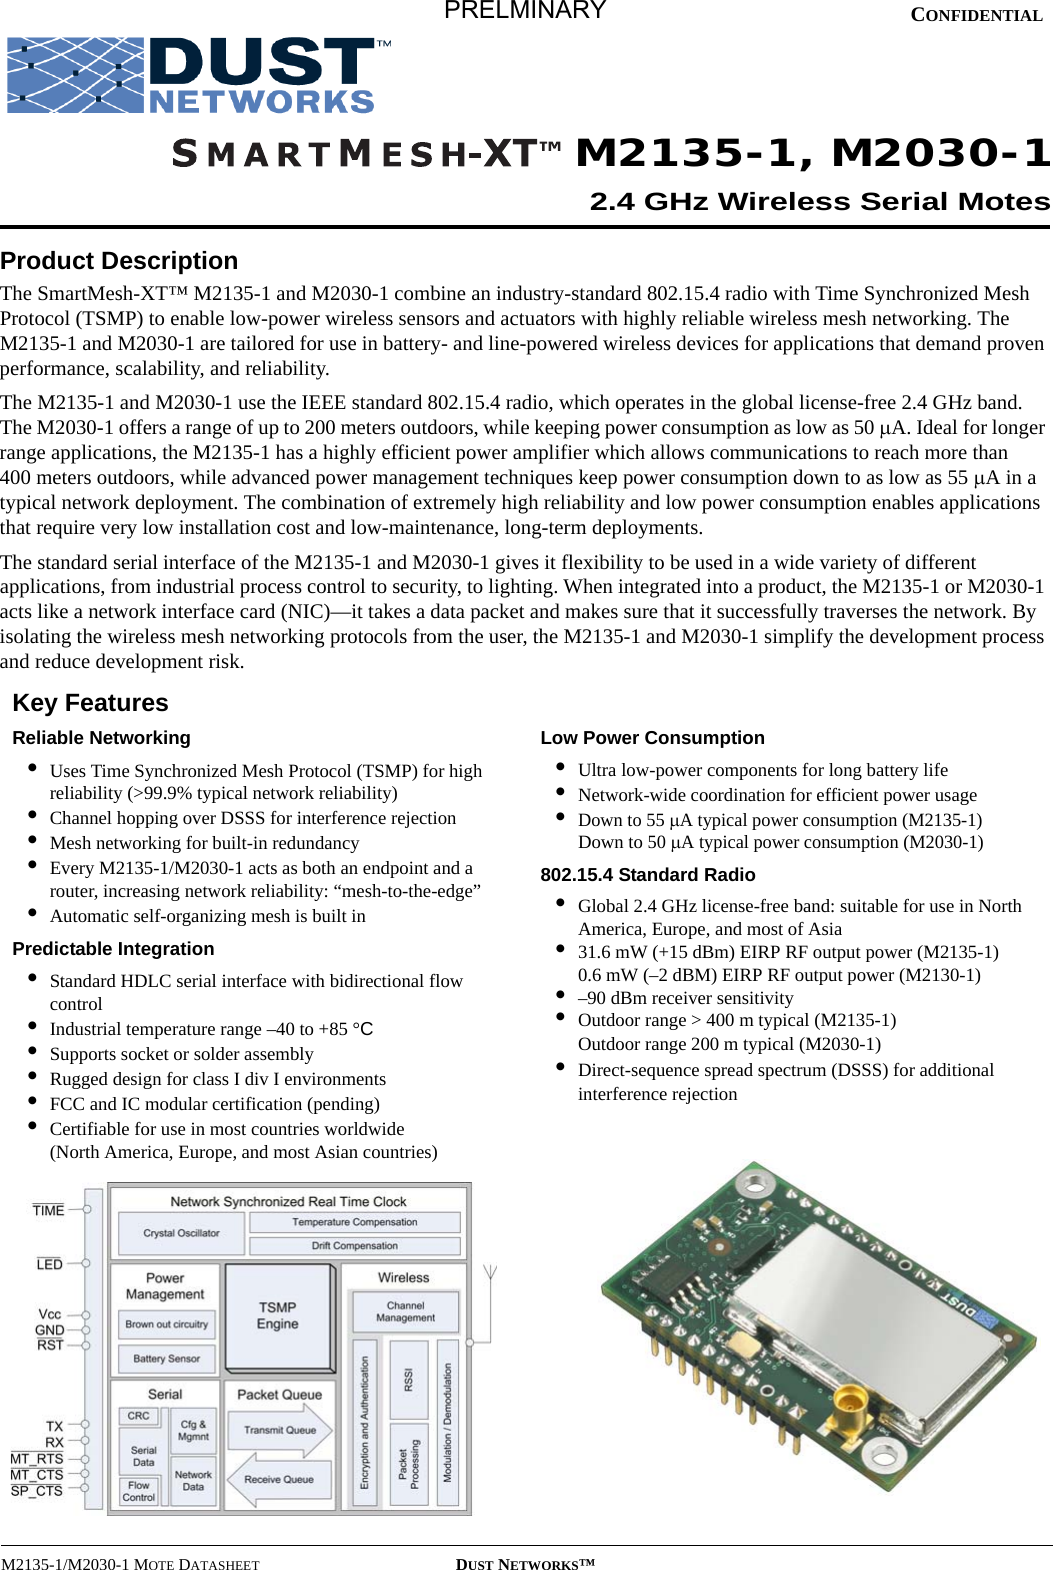 M2135-1/M2030-1 MOTE DATASHEET DUST NETWORKS™CONFIDENTIALProduct DescriptionThe SmartMesh-XT™ M2135-1 and M2030-1 combine an industry-standard 802.15.4 radio with Time Synchronized Mesh Protocol (TSMP) to enable low-power wireless sensors and actuators with highly reliable wireless mesh networking. The M2135-1 and M2030-1 are tailored for use in battery- and line-powered wireless devices for applications that demand proven performance, scalability, and reliability.The M2135-1 and M2030-1 use the IEEE standard 802.15.4 radio, which operates in the global license-free 2.4 GHz band. The M2030-1 offers a range of up to 200 meters outdoors, while keeping power consumption as low as 50 µA. Ideal for longer range applications, the M2135-1 has a highly efficient power amplifier which allows communications to reach more than 400 meters outdoors, while advanced power management techniques keep power consumption down to as low as 55 µA in a typical network deployment. The combination of extremely high reliability and low power consumption enables applications that require very low installation cost and low-maintenance, long-term deployments.The standard serial interface of the M2135-1 and M2030-1 gives it flexibility to be used in a wide variety of different applications, from industrial process control to security, to lighting. When integrated into a product, the M2135-1 or M2030-1 acts like a network interface card (NIC)—it takes a data packet and makes sure that it successfully traverses the network. By isolating the wireless mesh networking protocols from the user, the M2135-1 and M2030-1 simplify the development process and reduce development risk.Key FeaturesReliable Networking•Uses Time Synchronized Mesh Protocol (TSMP) for high reliability (&gt;99.9% typical network reliability)•Channel hopping over DSSS for interference rejection•Mesh networking for built-in redundancy•Every M2135-1/M2030-1 acts as both an endpoint and a router, increasing network reliability: “mesh-to-the-edge”•Automatic self-organizing mesh is built inPredictable Integration•Standard HDLC serial interface with bidirectional flow control•Industrial temperature range –40 to +85 °C•Supports socket or solder assembly•Rugged design for class I div I environments•FCC and IC modular certification (pending)•Certifiable for use in most countries worldwide  (North America, Europe, and most Asian countries)Low Power Consumption•Ultra low-power components for long battery life•Network-wide coordination for efficient power usage•Down to 55 µA typical power consumption (M2135-1) Down to 50 µA typical power consumption (M2030-1)802.15.4 Standard Radio•Global 2.4 GHz license-free band: suitable for use in North America, Europe, and most of Asia•31.6 mW (+15 dBm) EIRP RF output power (M2135-1) 0.6 mW (–2 dBM) EIRP RF output power (M2130-1)•–90 dBm receiver sensitivity•Outdoor range &gt; 400 m typical (M2135-1) Outdoor range 200 m typical (M2030-1)•Direct-sequence spread spectrum (DSSS) for additional interference rejectionM2135-1, M2030-12.4 GHz Wireless Serial MotesPRELMINARY